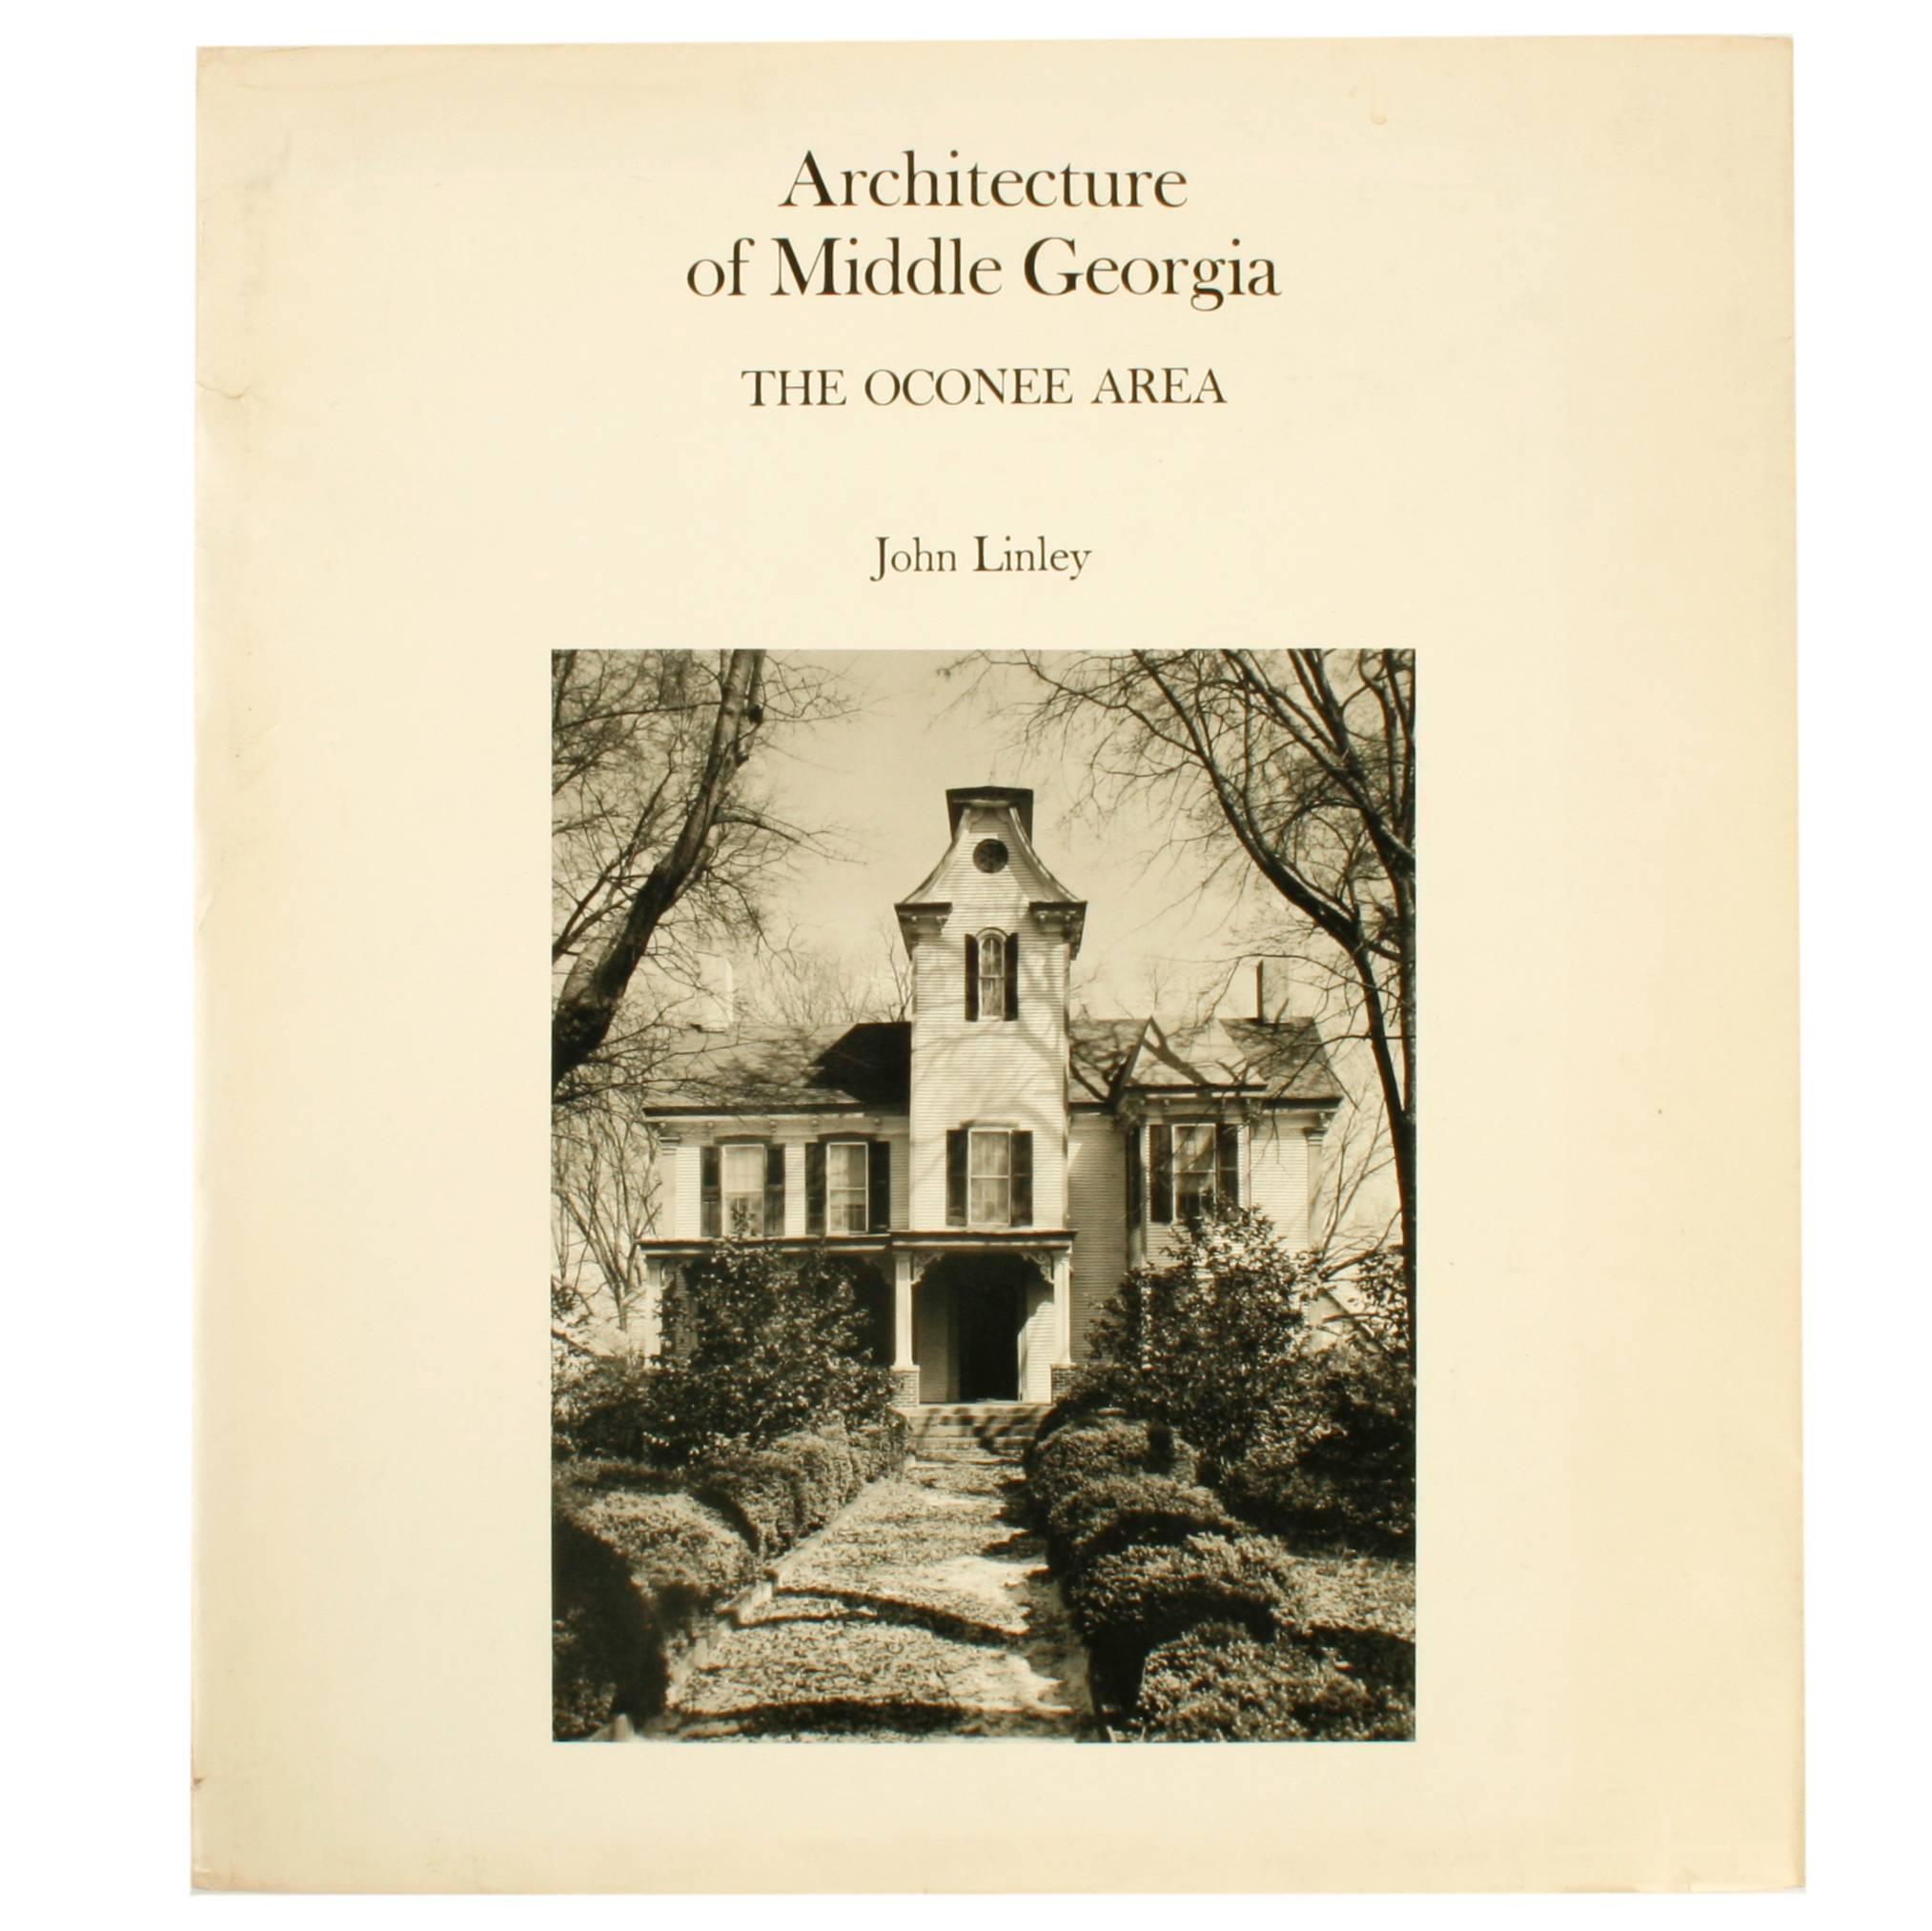 Architecture of Middle Georgia, The Oconee Area, by John Linley, 1st Ed